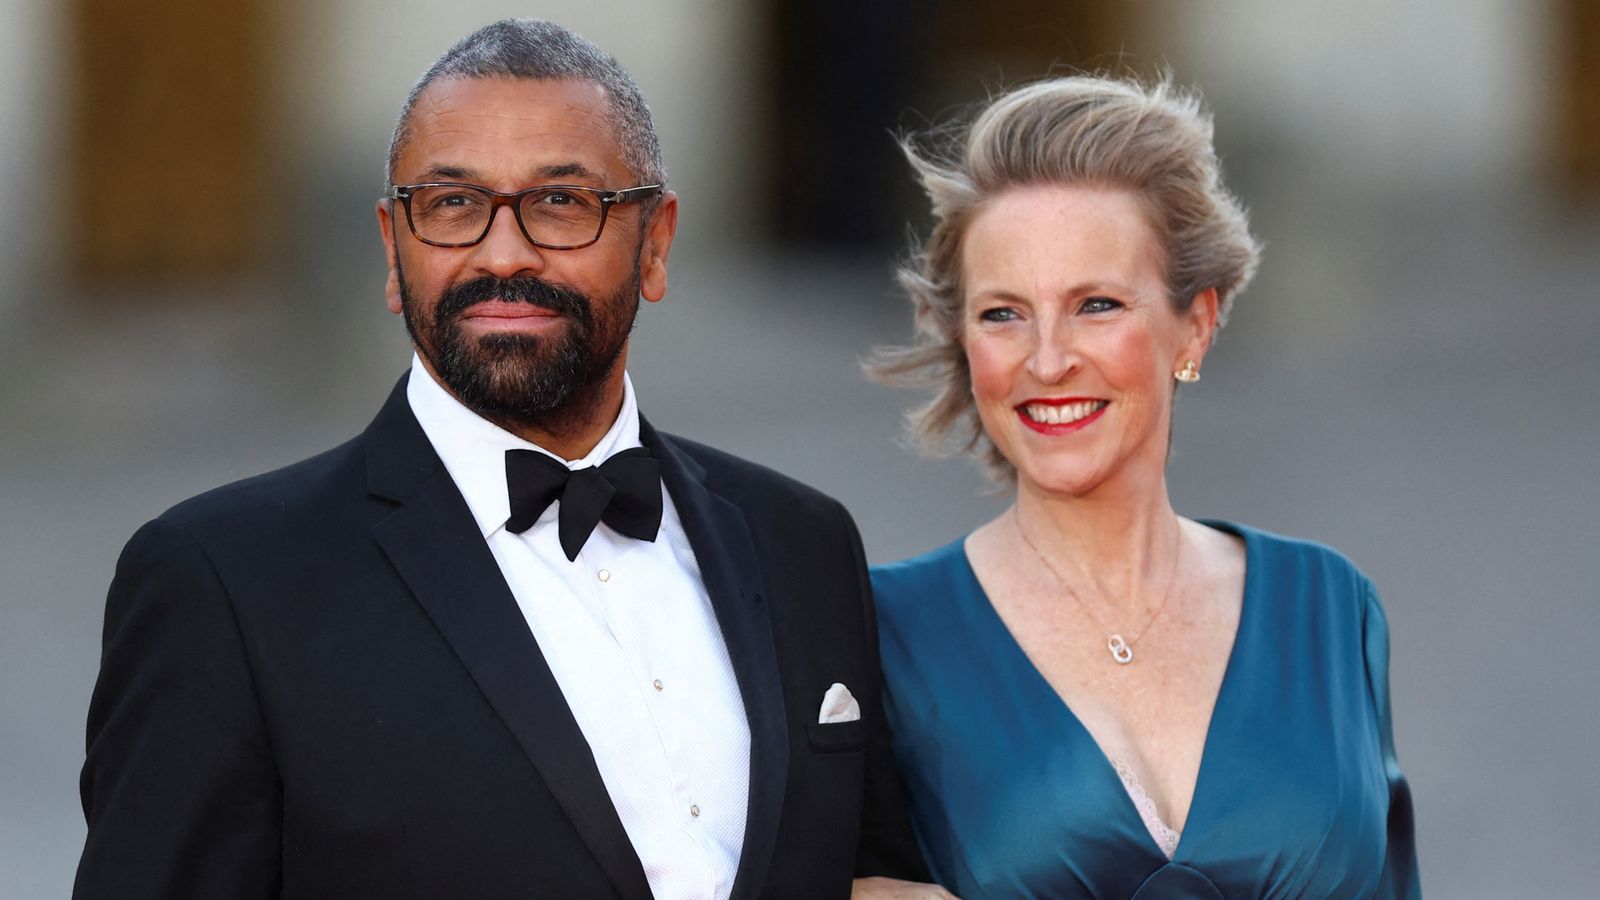 Home Secretary James Cleverly apologises after joking about spiking his wife's drink